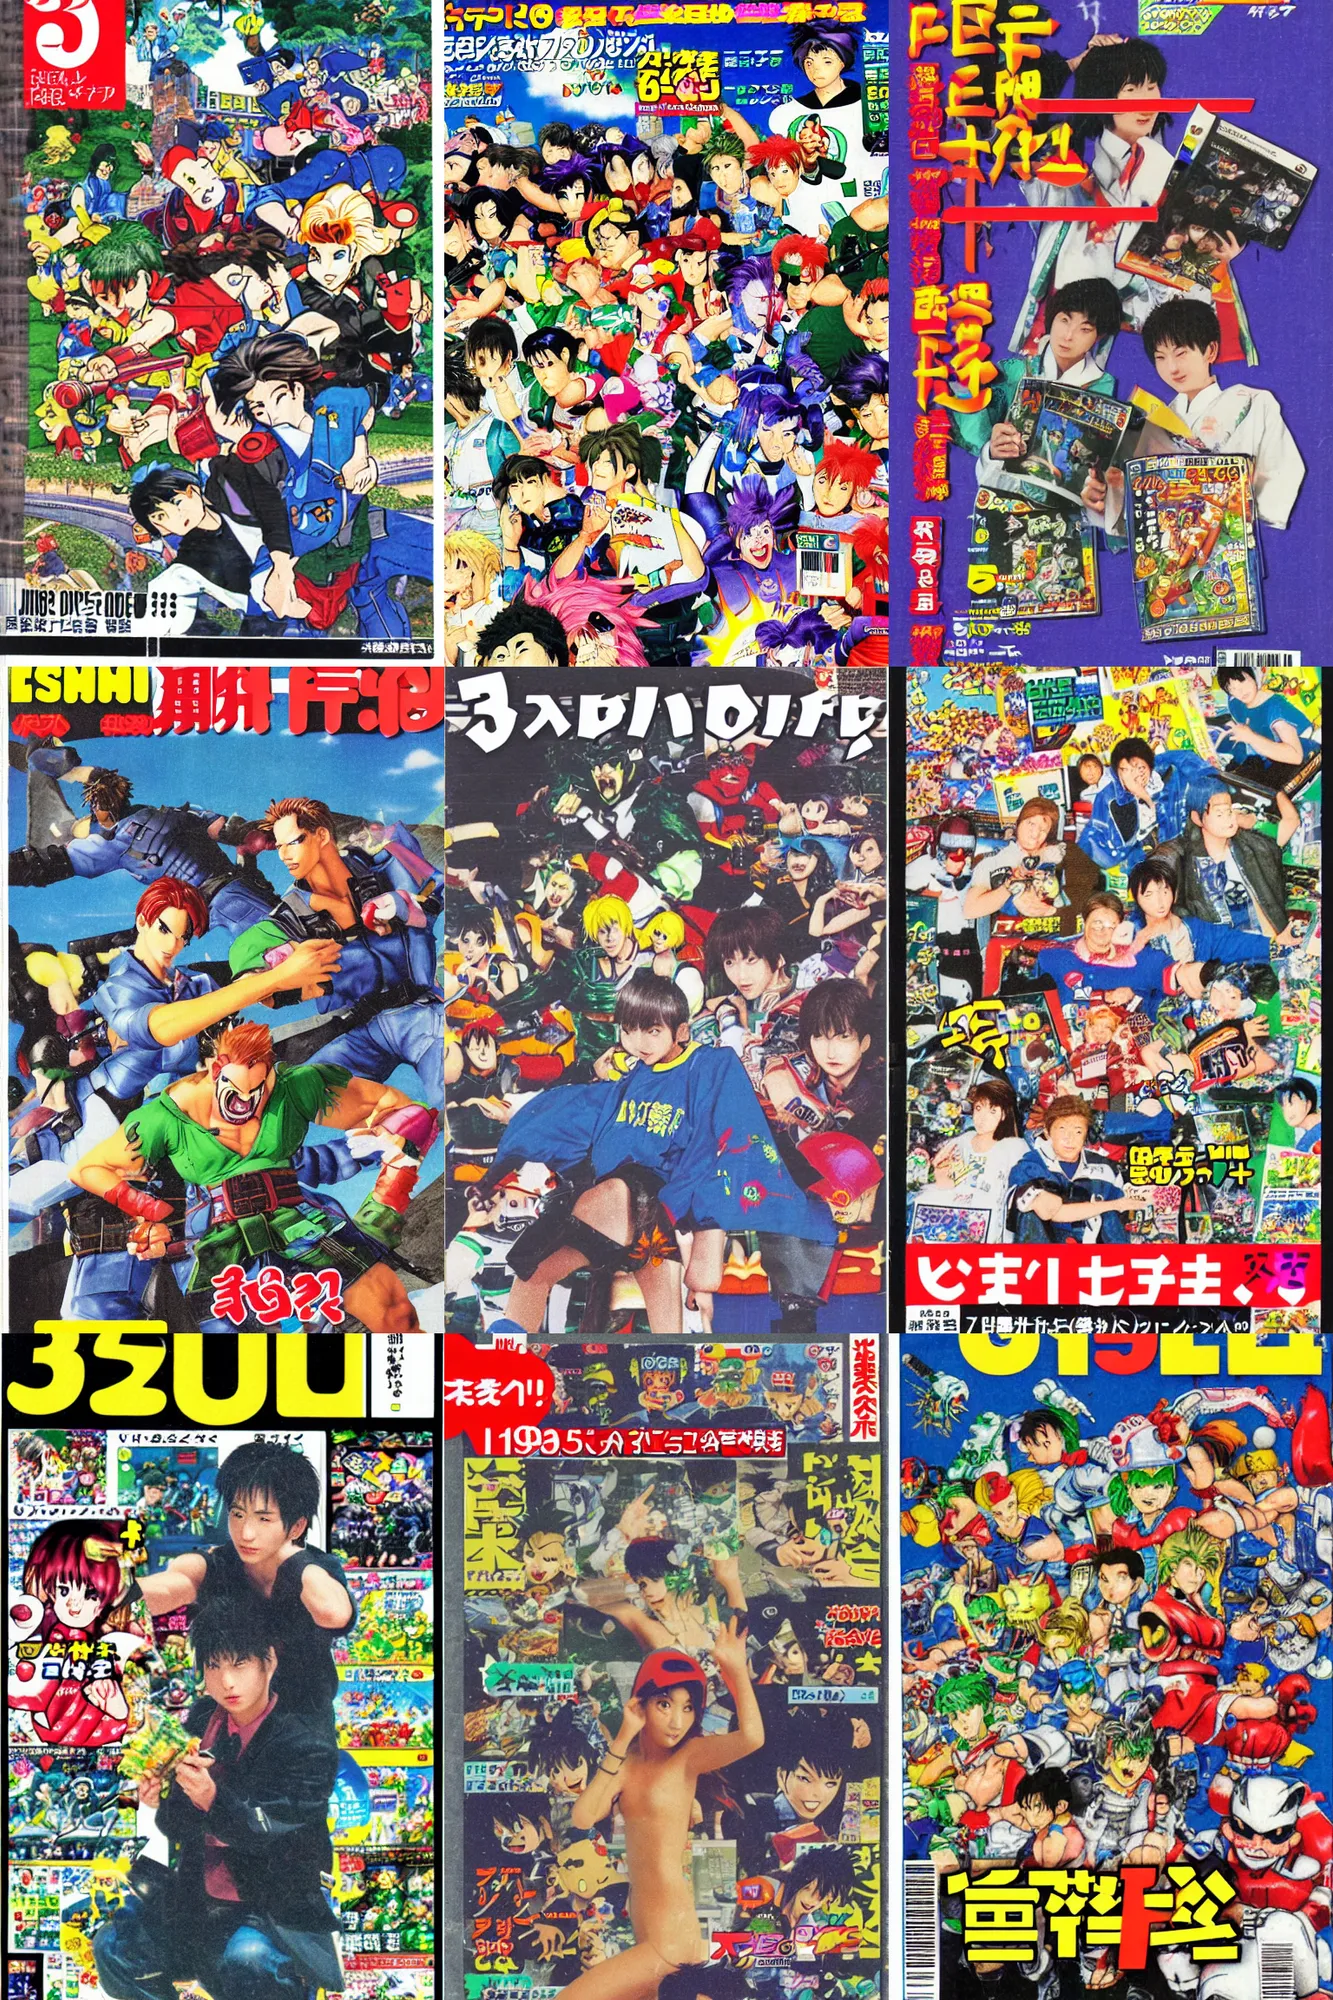 Prompt: 3 2 page of the 1 9 9 0 s japanese game magazine